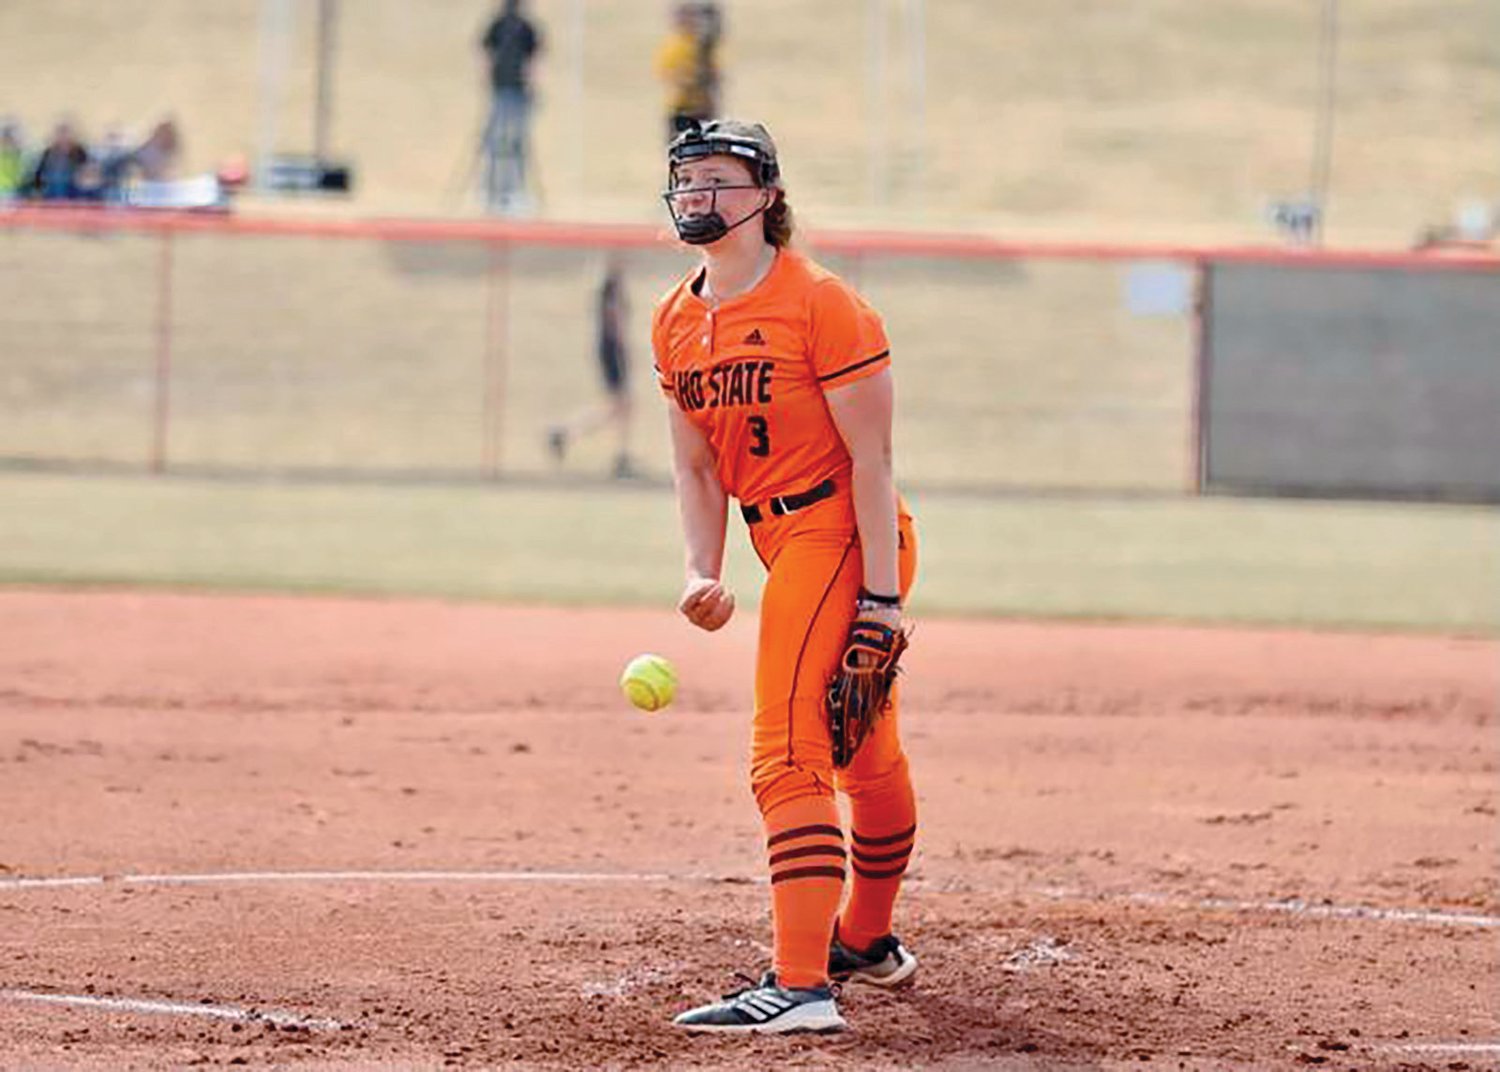 Haley Rainey, an Adna High School graduate, pitches for Idaho State University during the 2022 season.